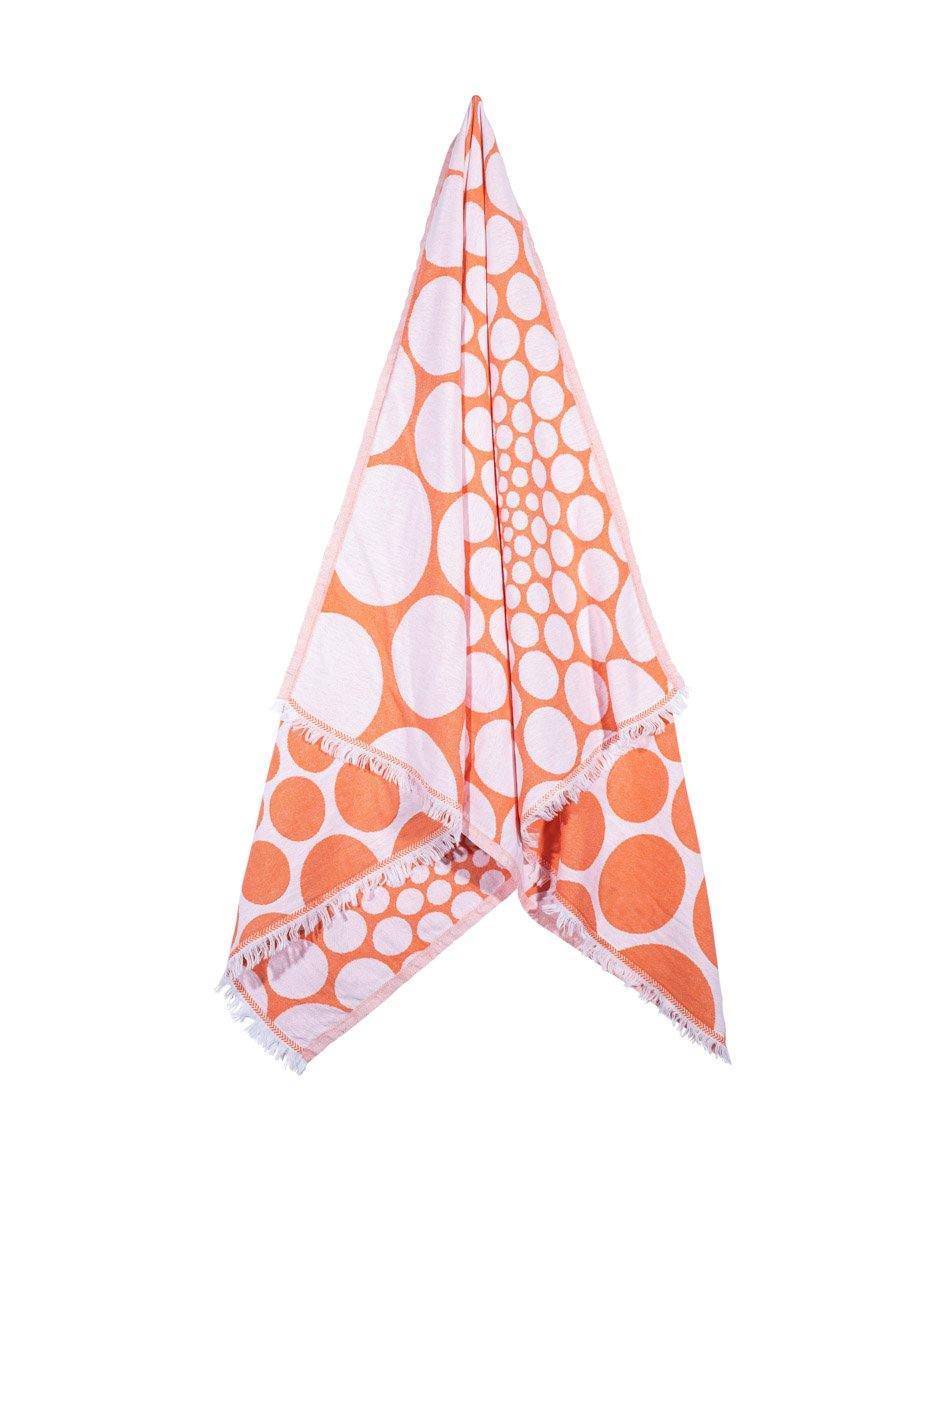 Bubbles - Spotty Coral Design Hanging Up